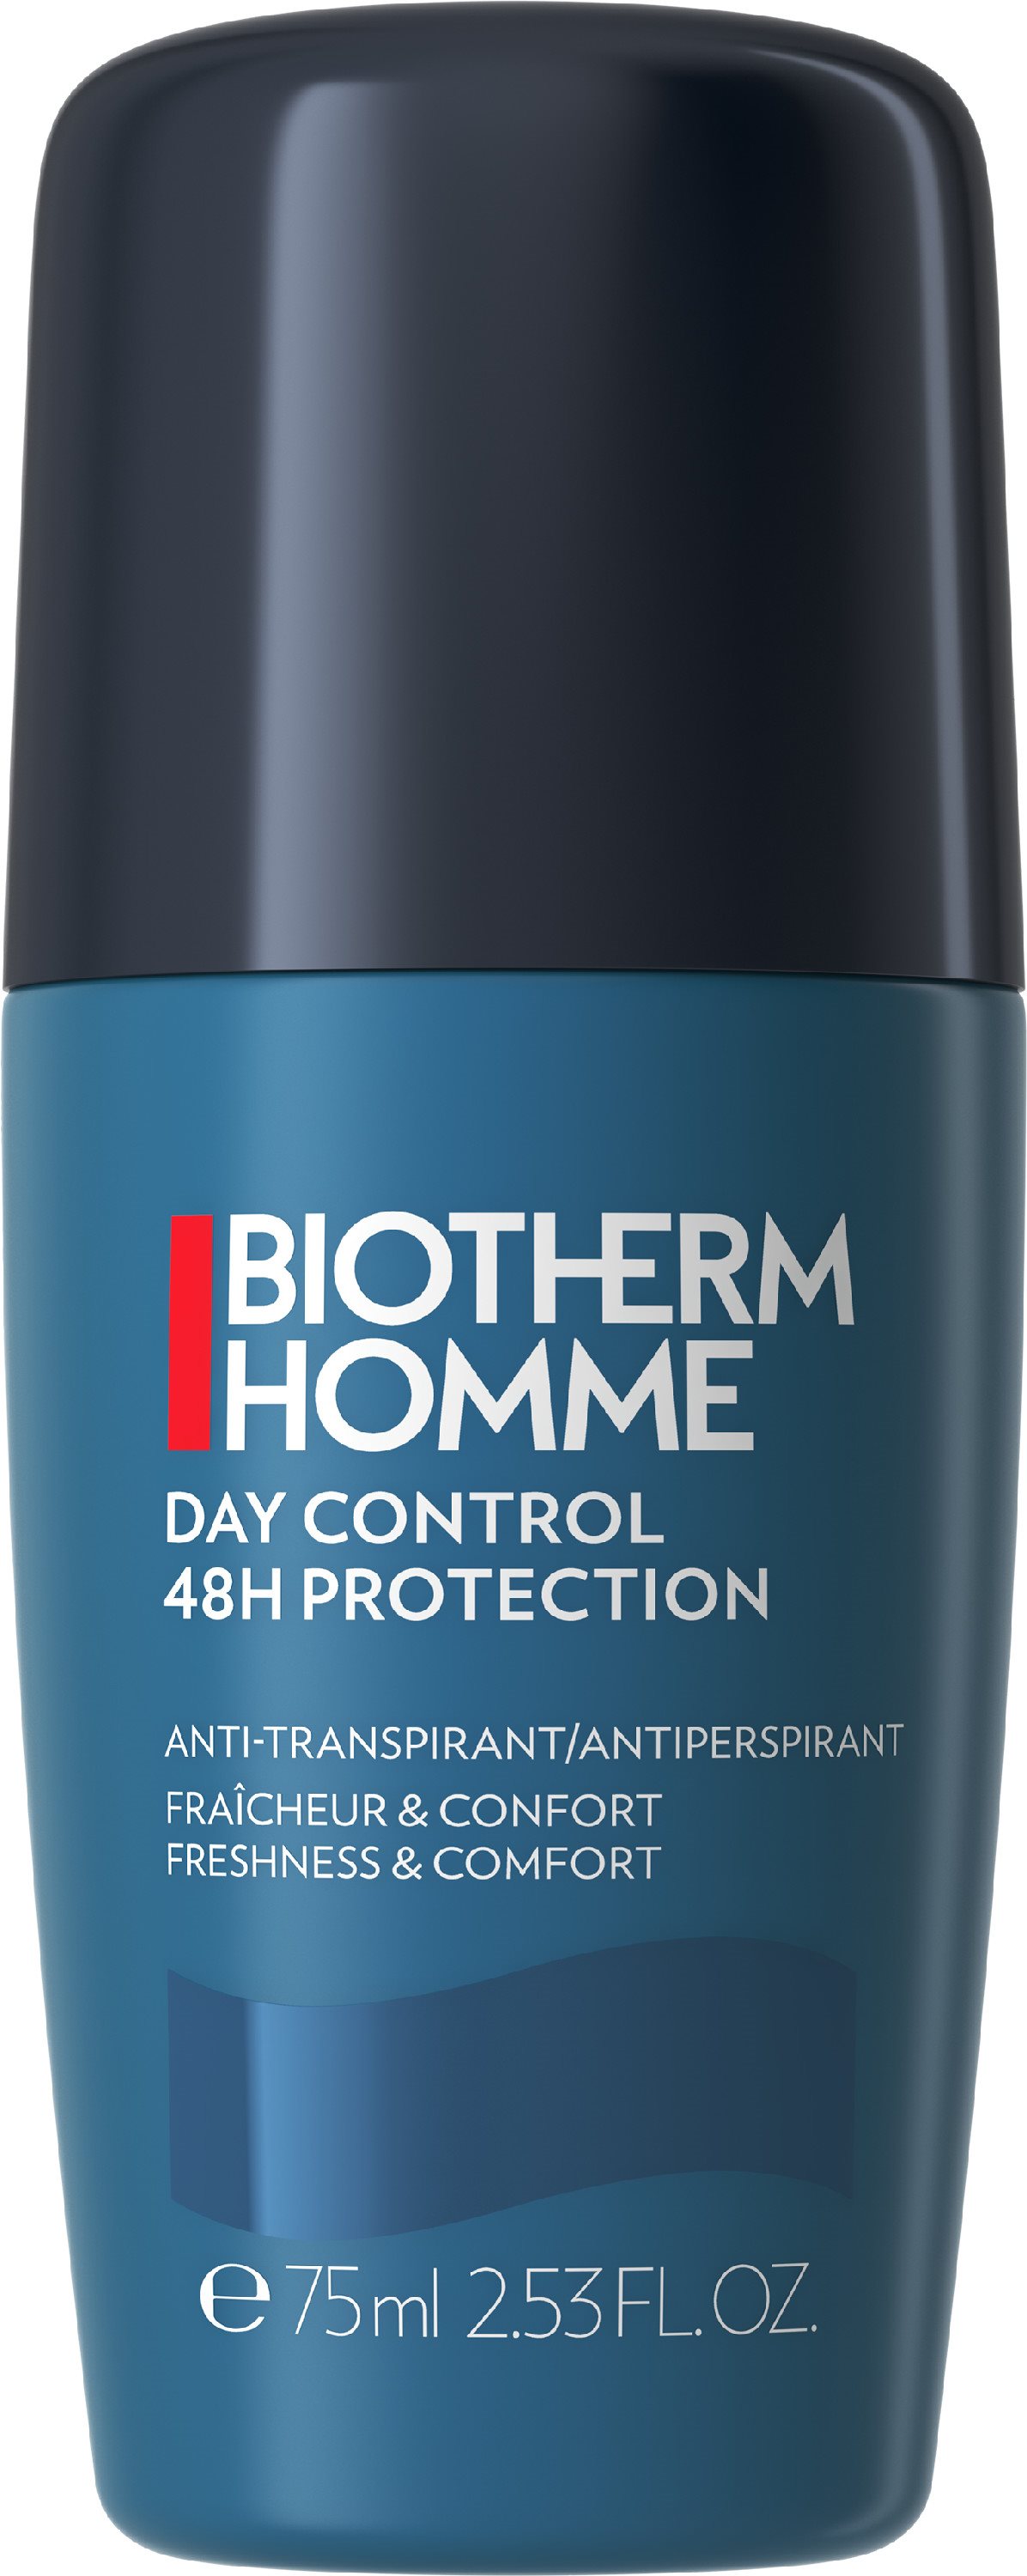 Biotherm Homme Day Control Deodorant Roll-on 48H 75